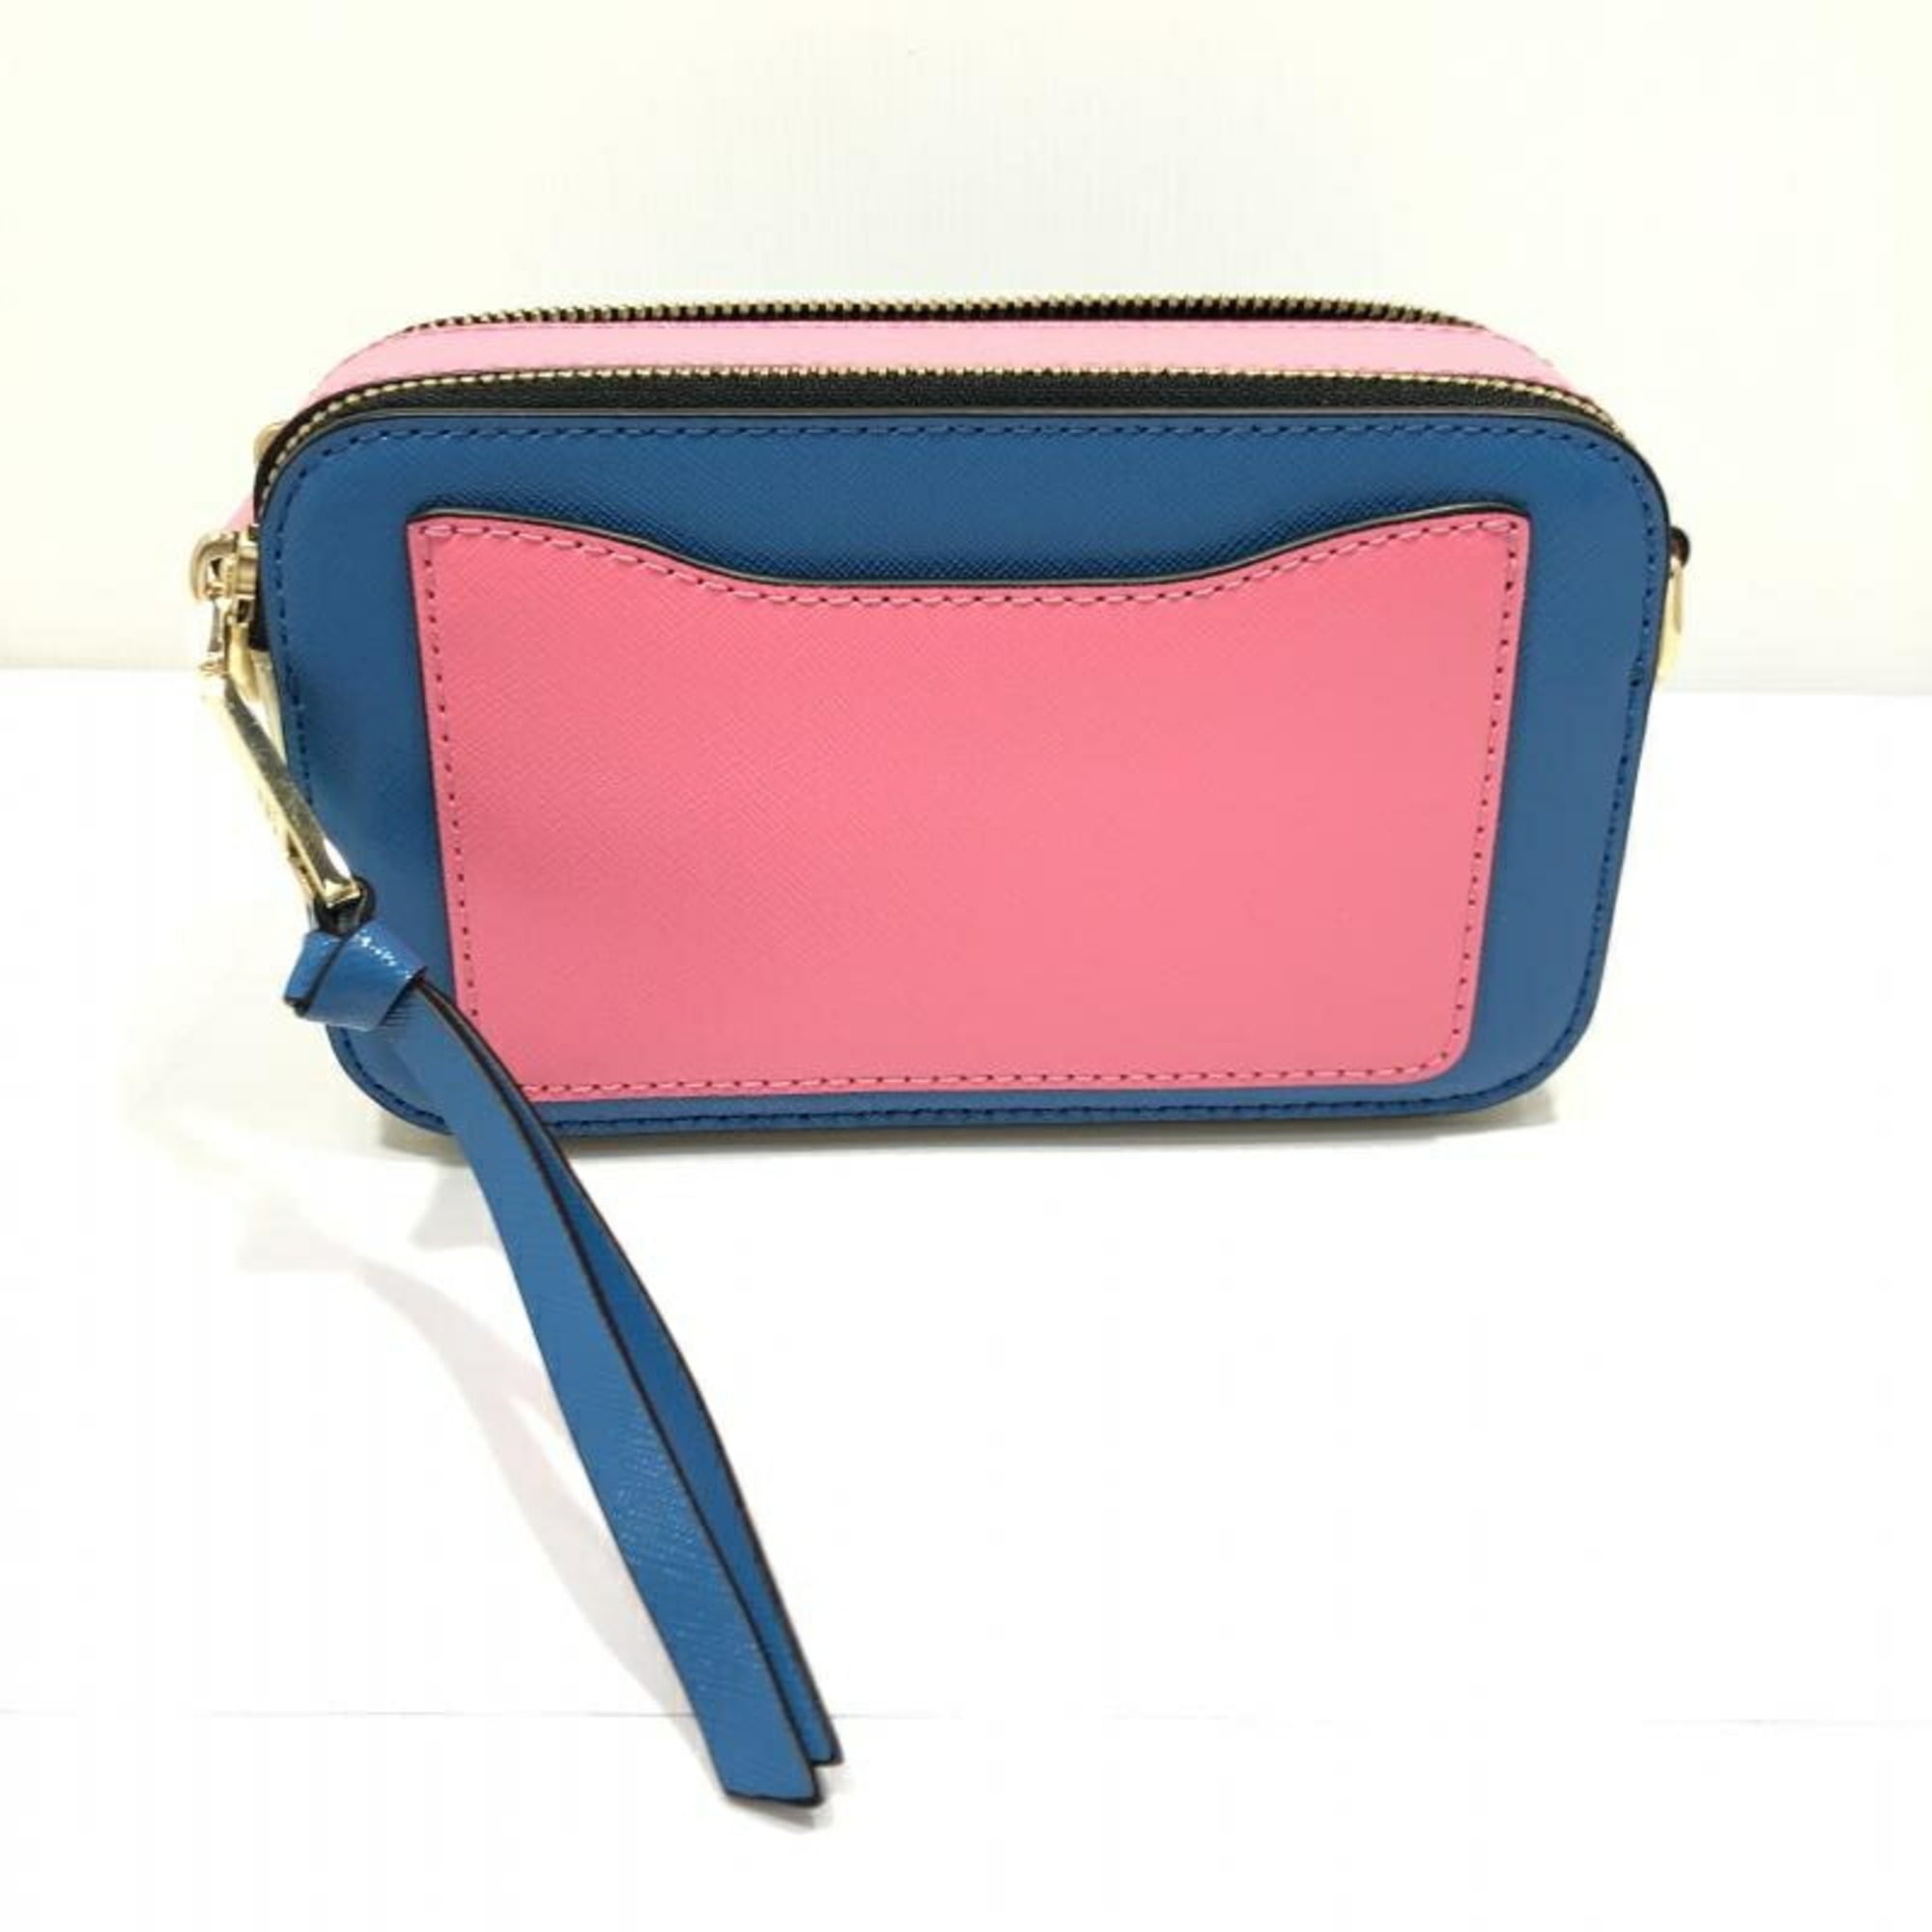 MARC JACOBS MARC JACOBS snap shot Shoulder crossbody Bag M0015373 leather  Blue Used M0015373｜Product Code：2106800483369｜BRAND OFF Online Store